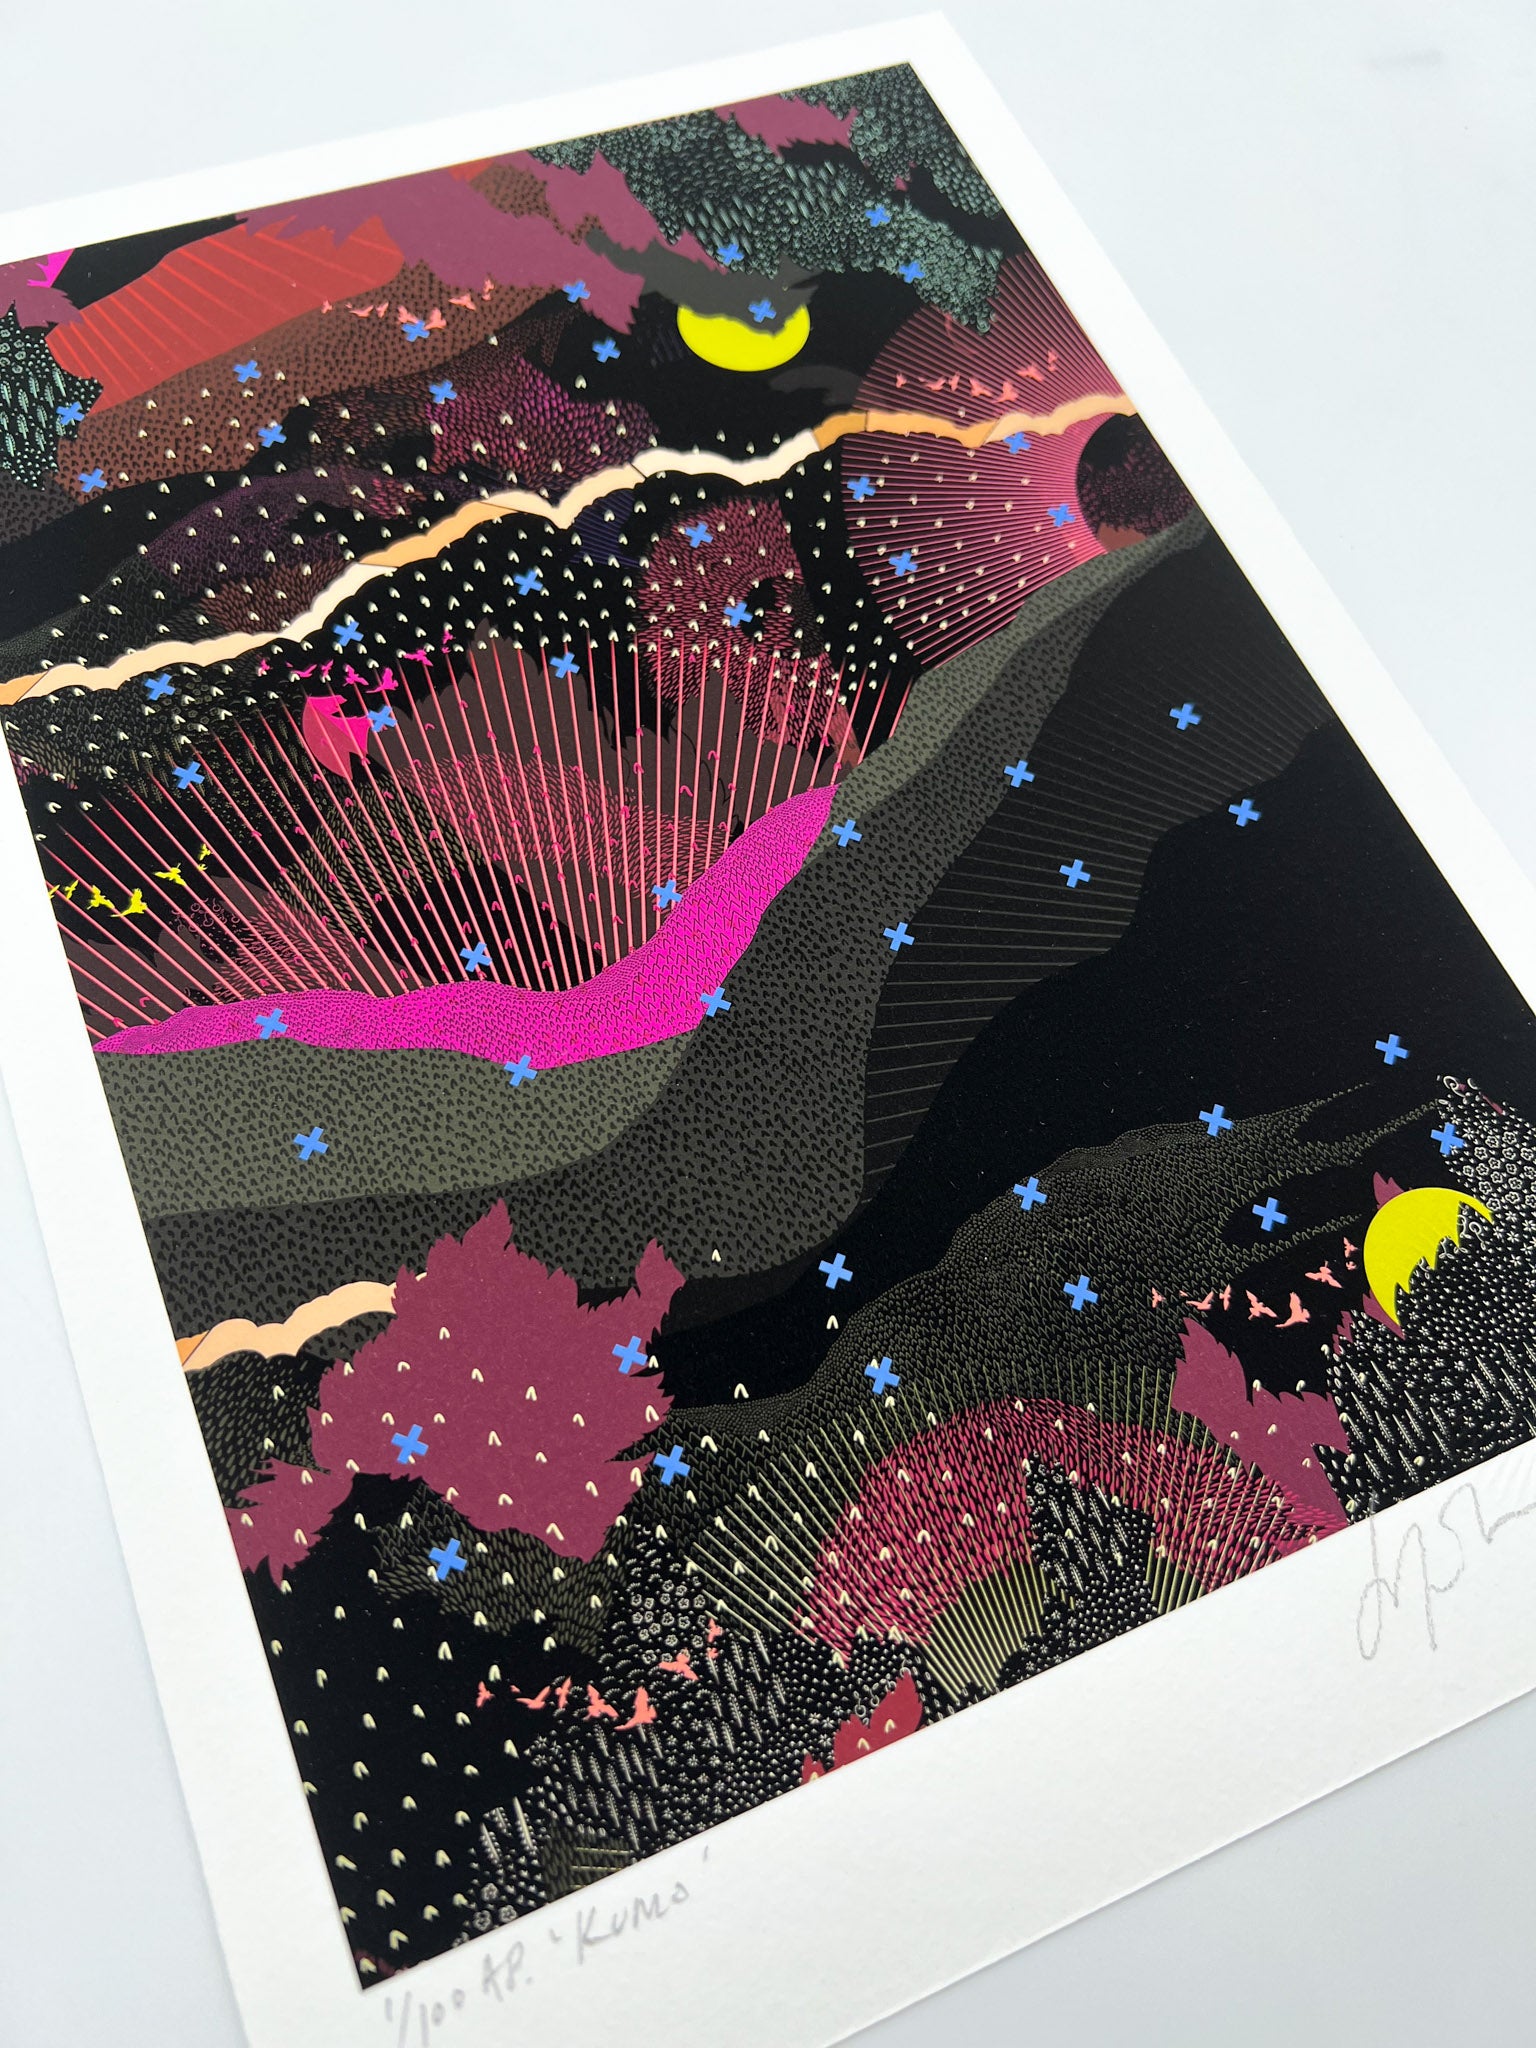 A giclee print with landscape design in greens and pinks with lime green moon details